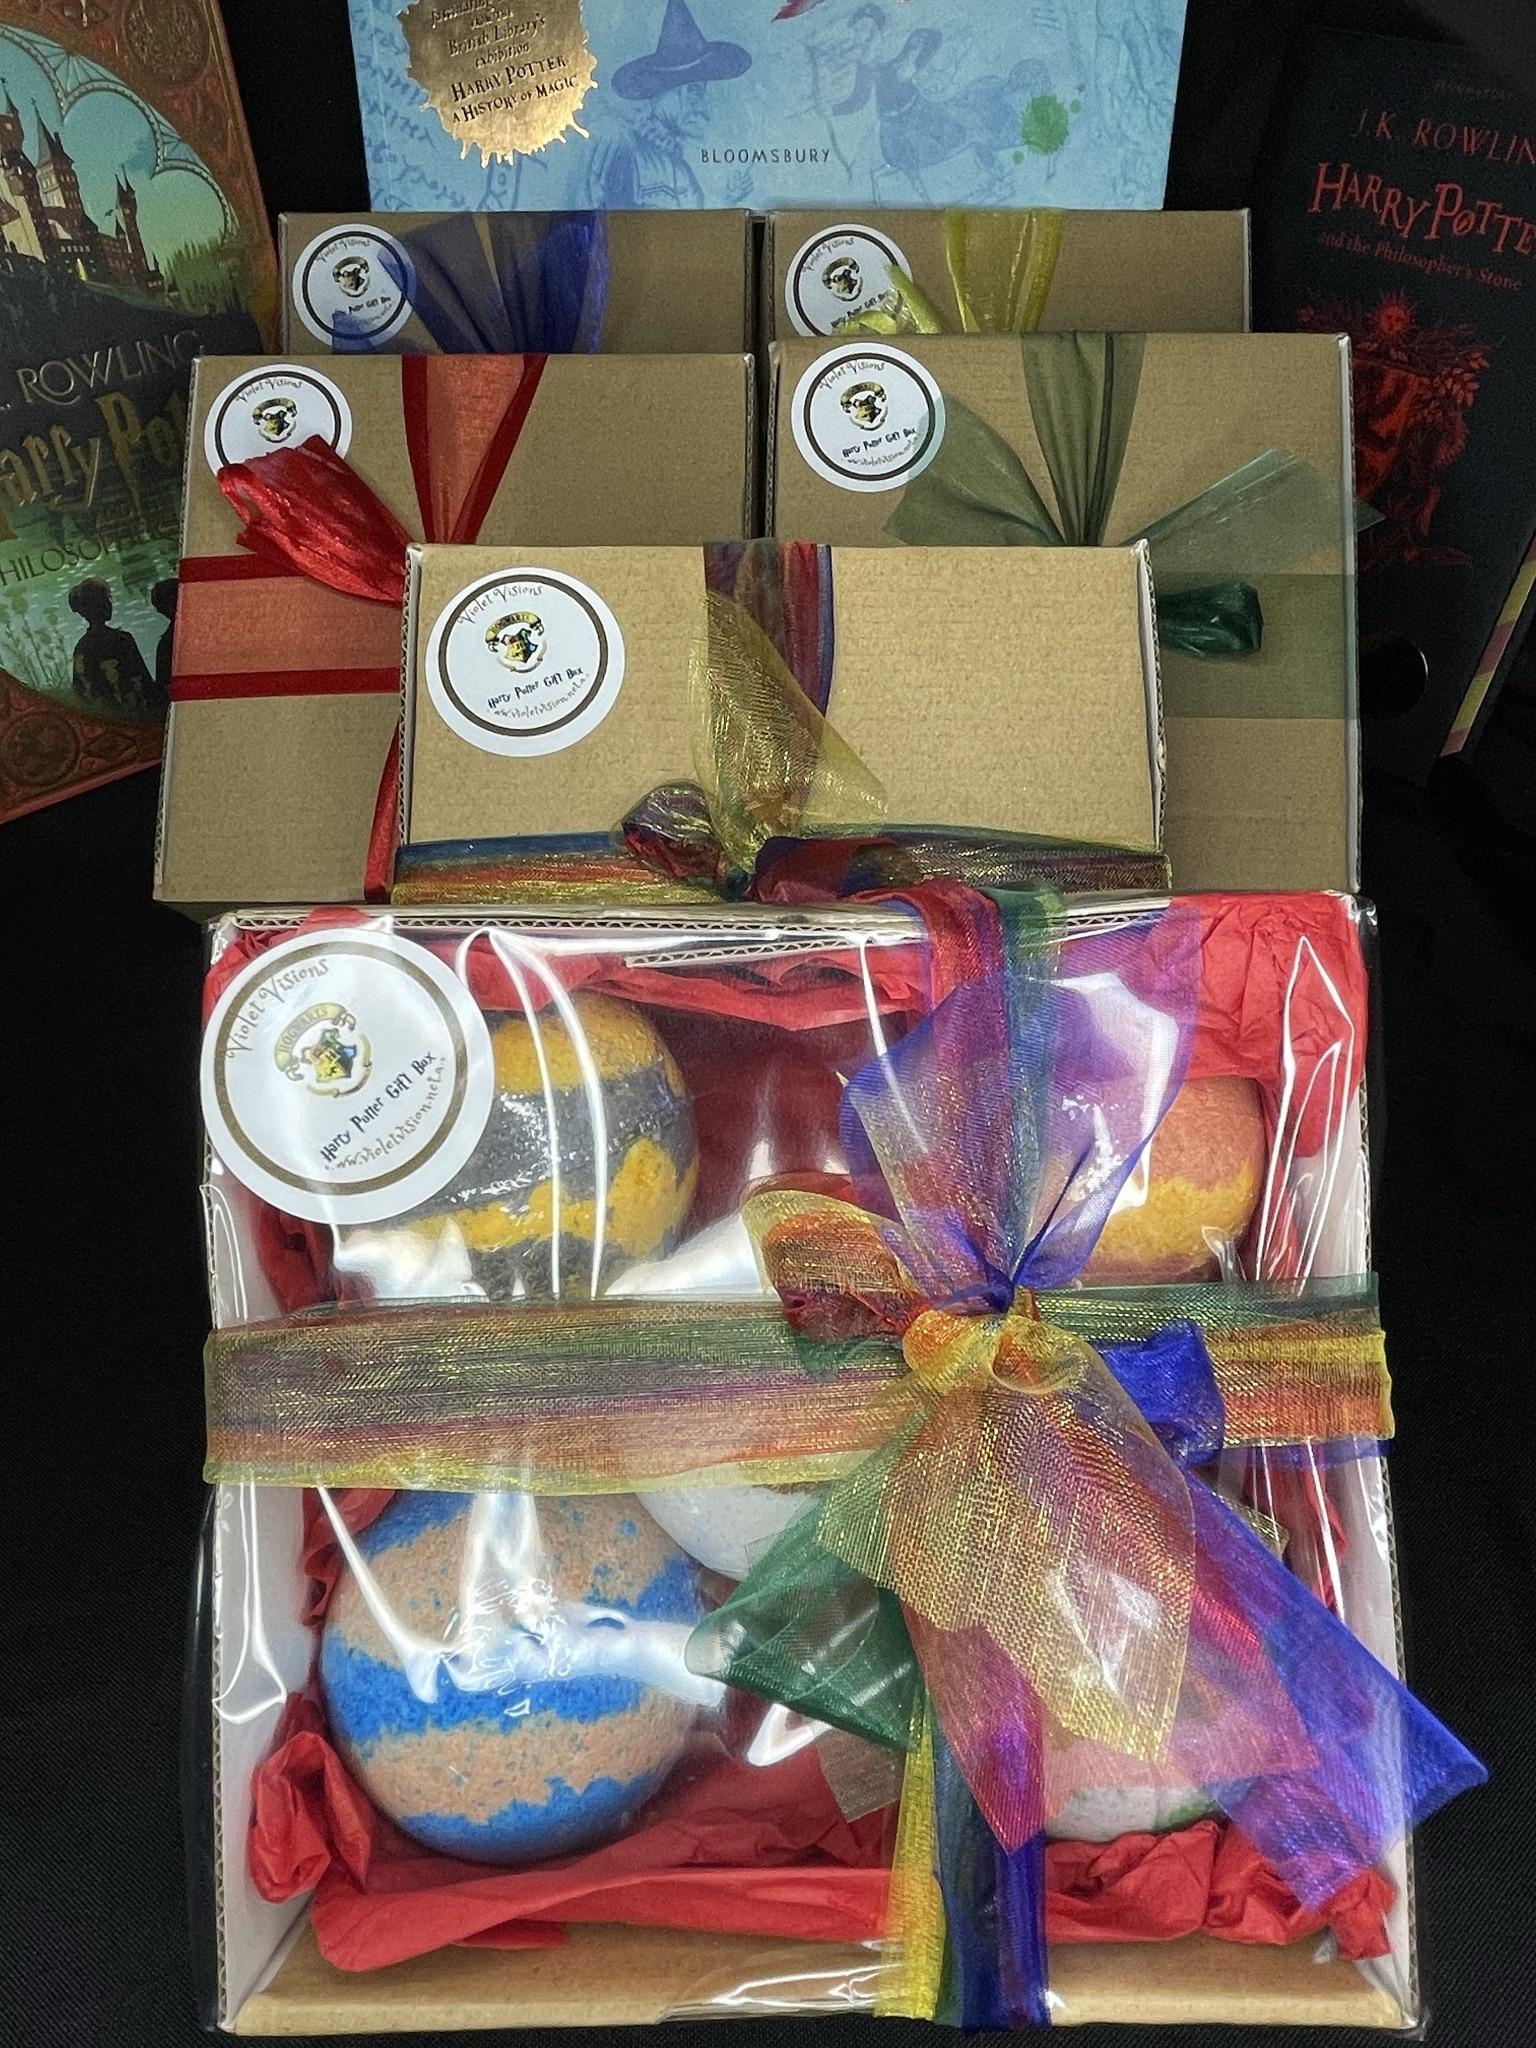 Hintsforyourloves — A Guide to Harry Potter Gifts for the True...